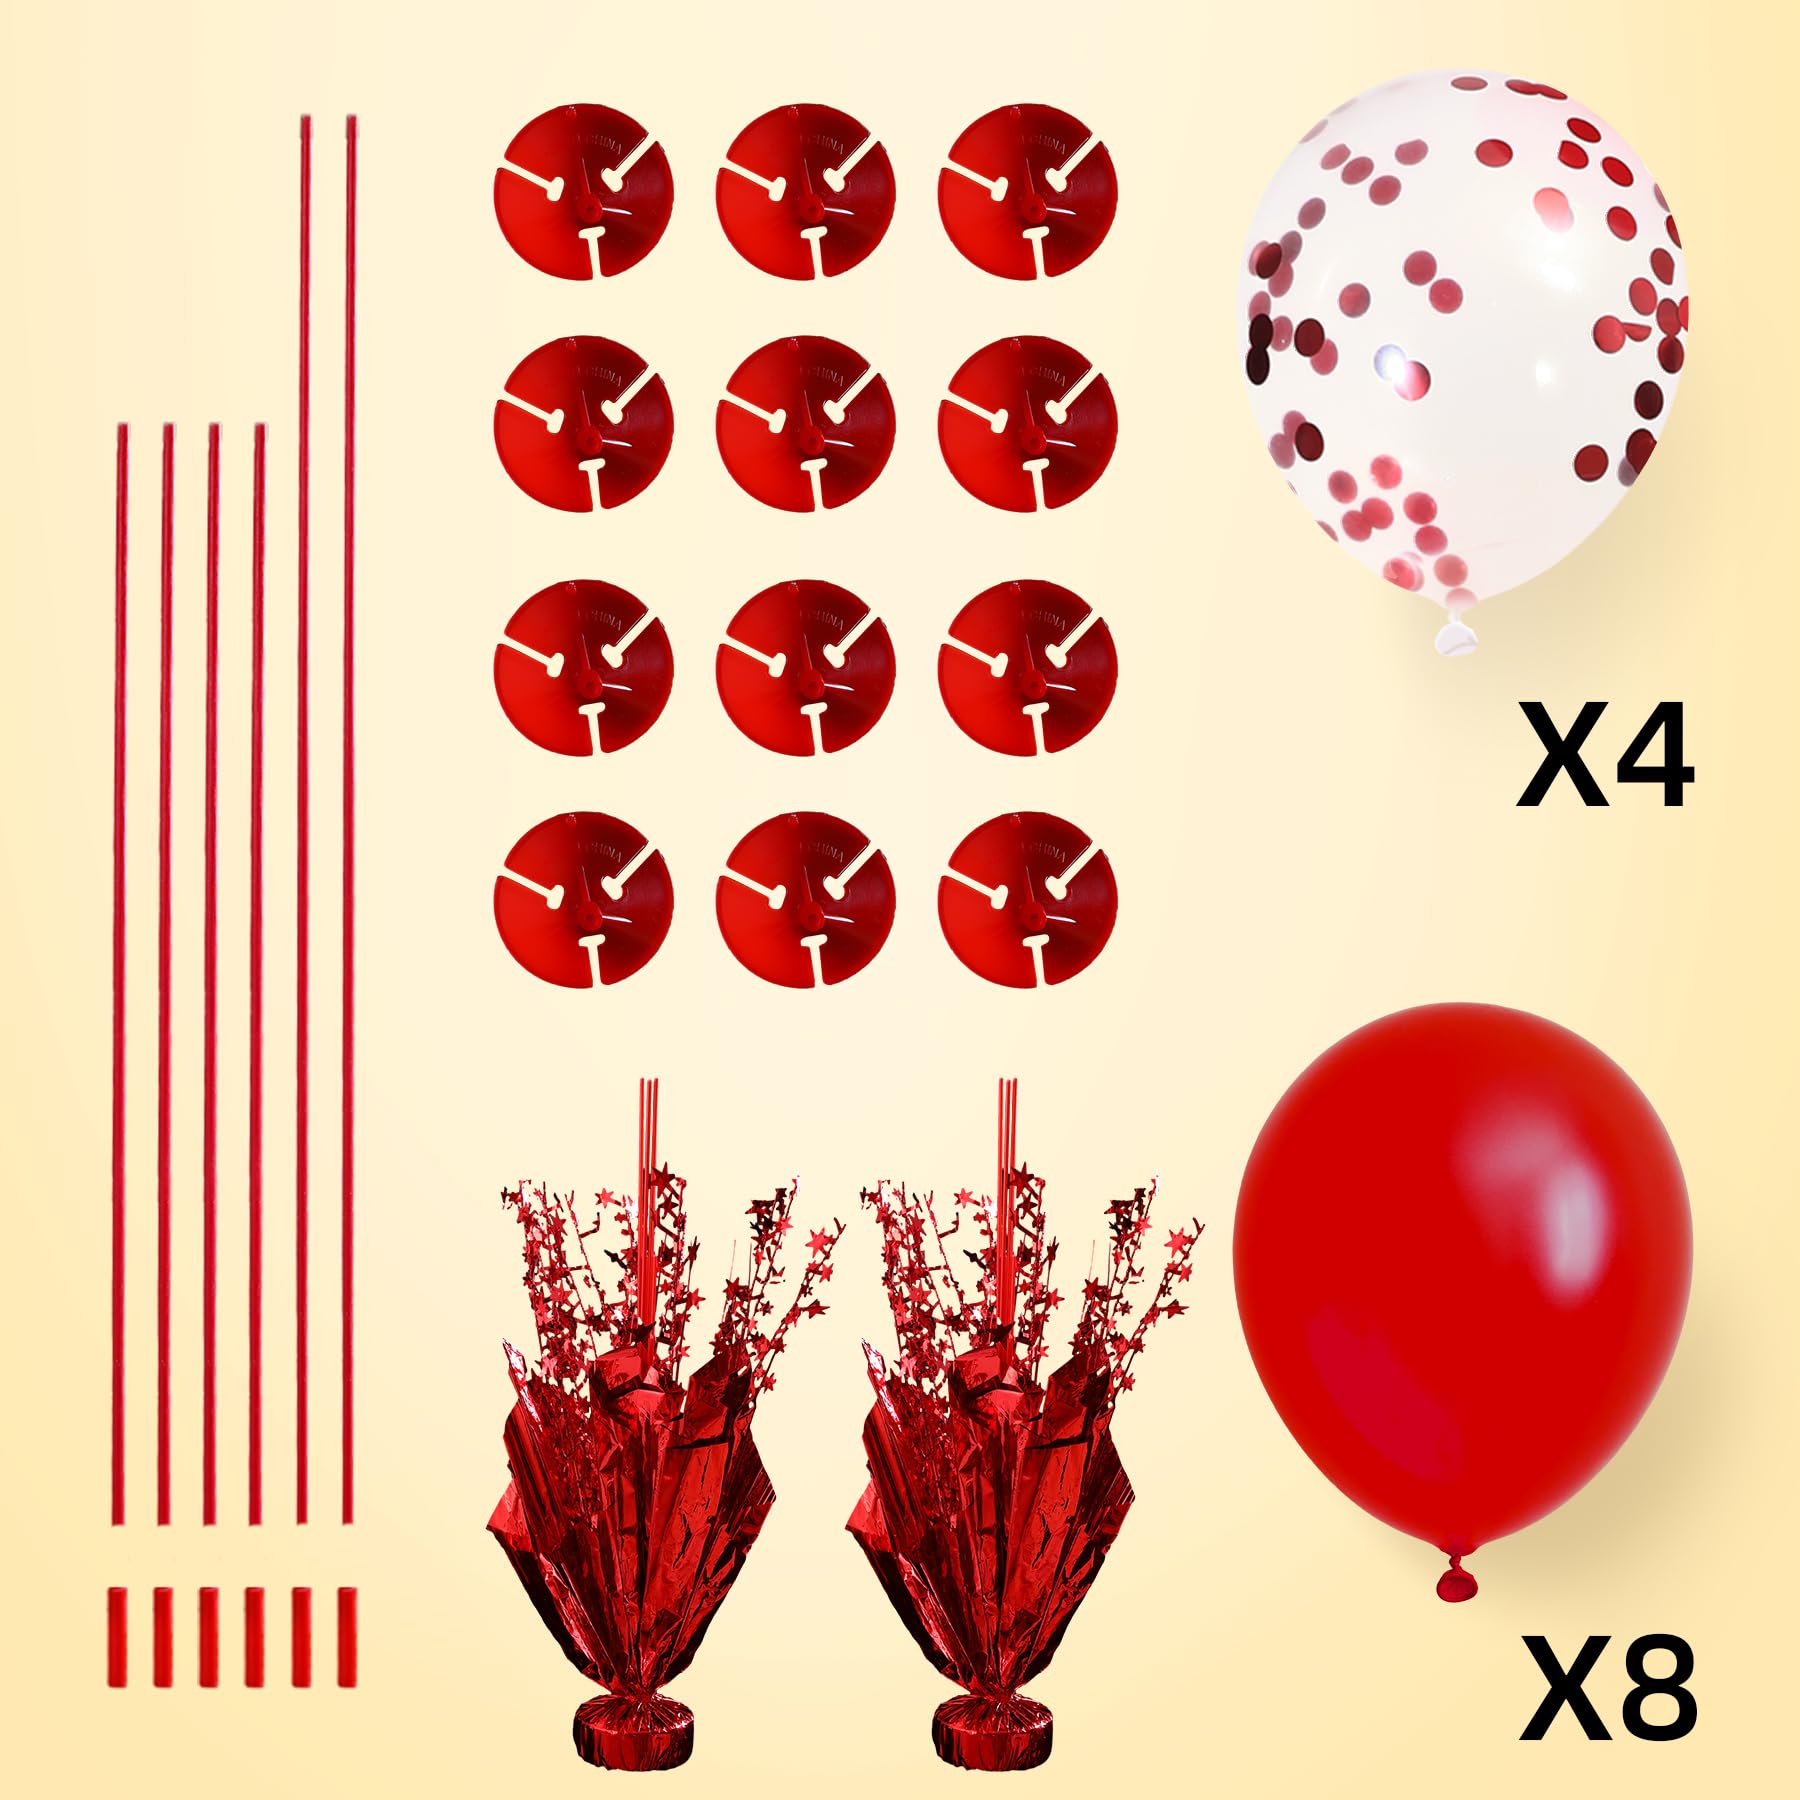 2 Set Red Table Balloons Centerpiece with 12 Red and Confetti Balloons Stand Kit for Graduation Birthday Party Baby Shower Merry Christmas Valentine's Wedding Prom Cake Table Decorations